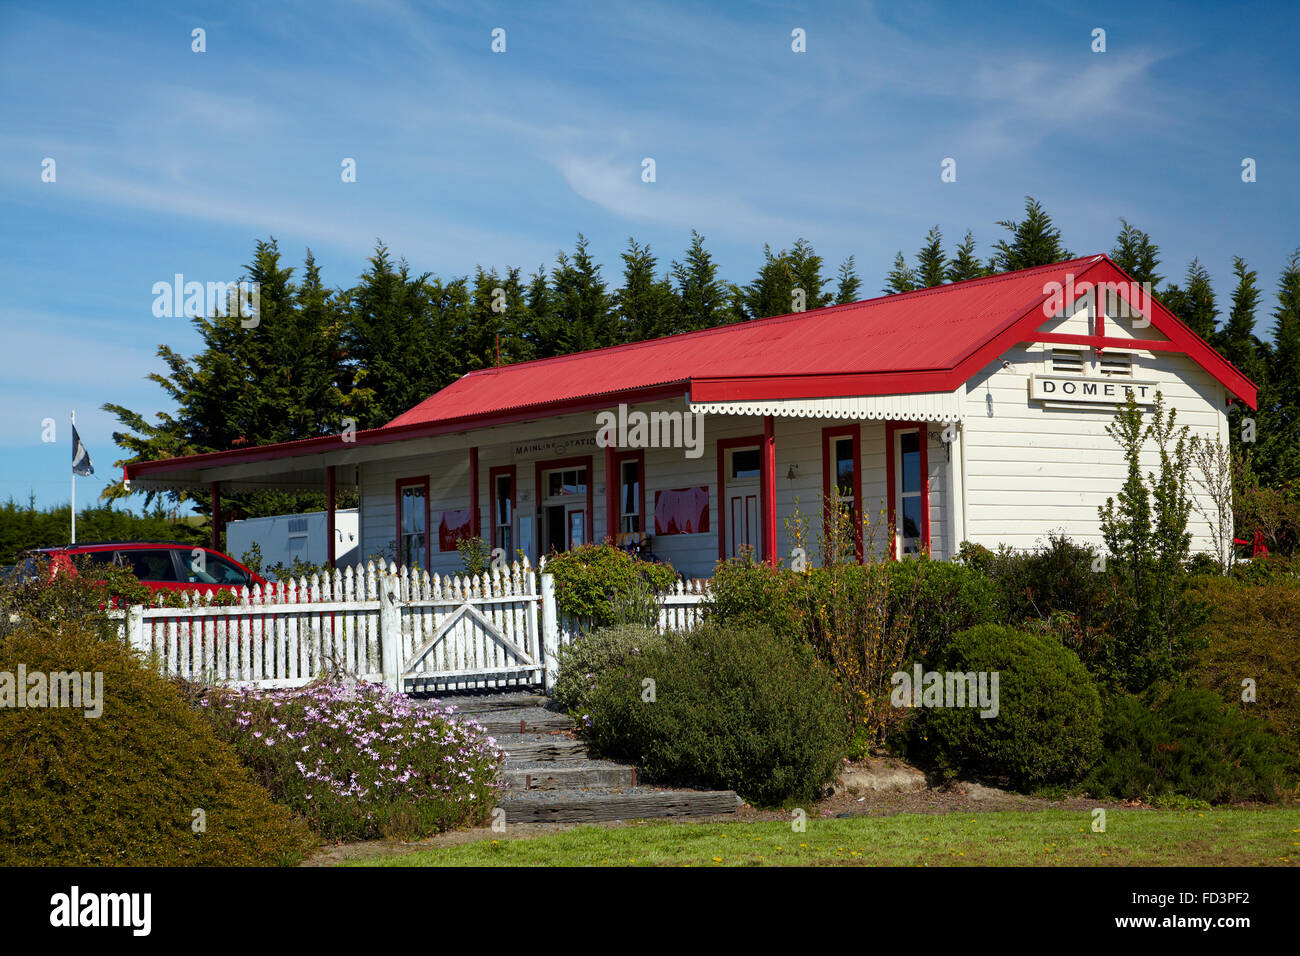 Cafe in old Domett Railway Station, North Canterbury, South Island, New Zealand Stock Photo